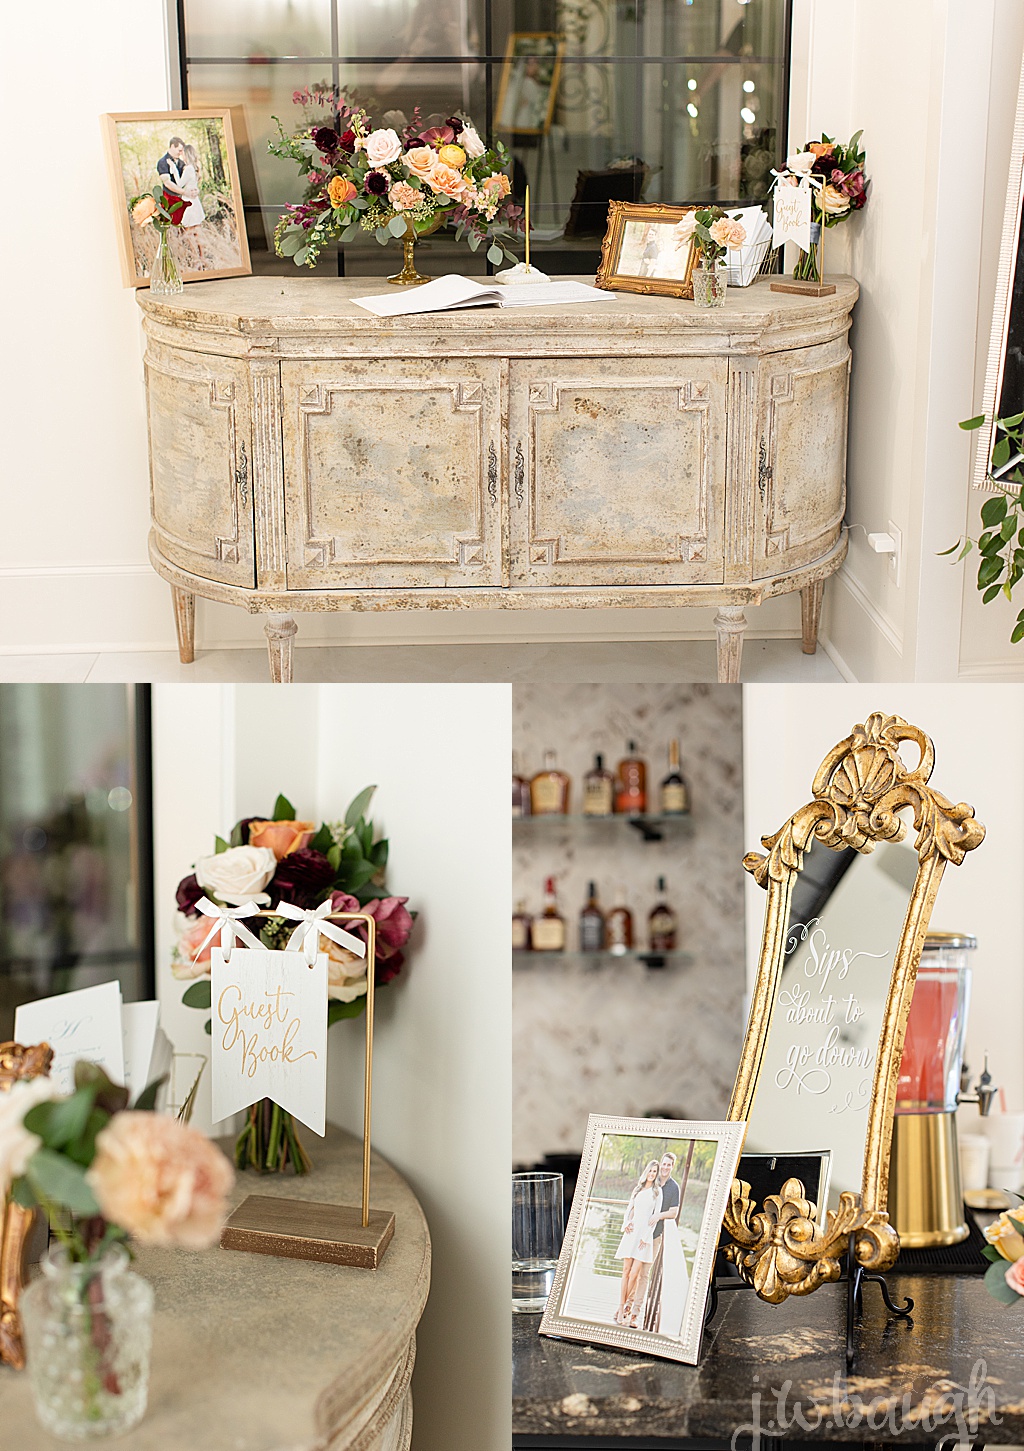 the peach orchard reception